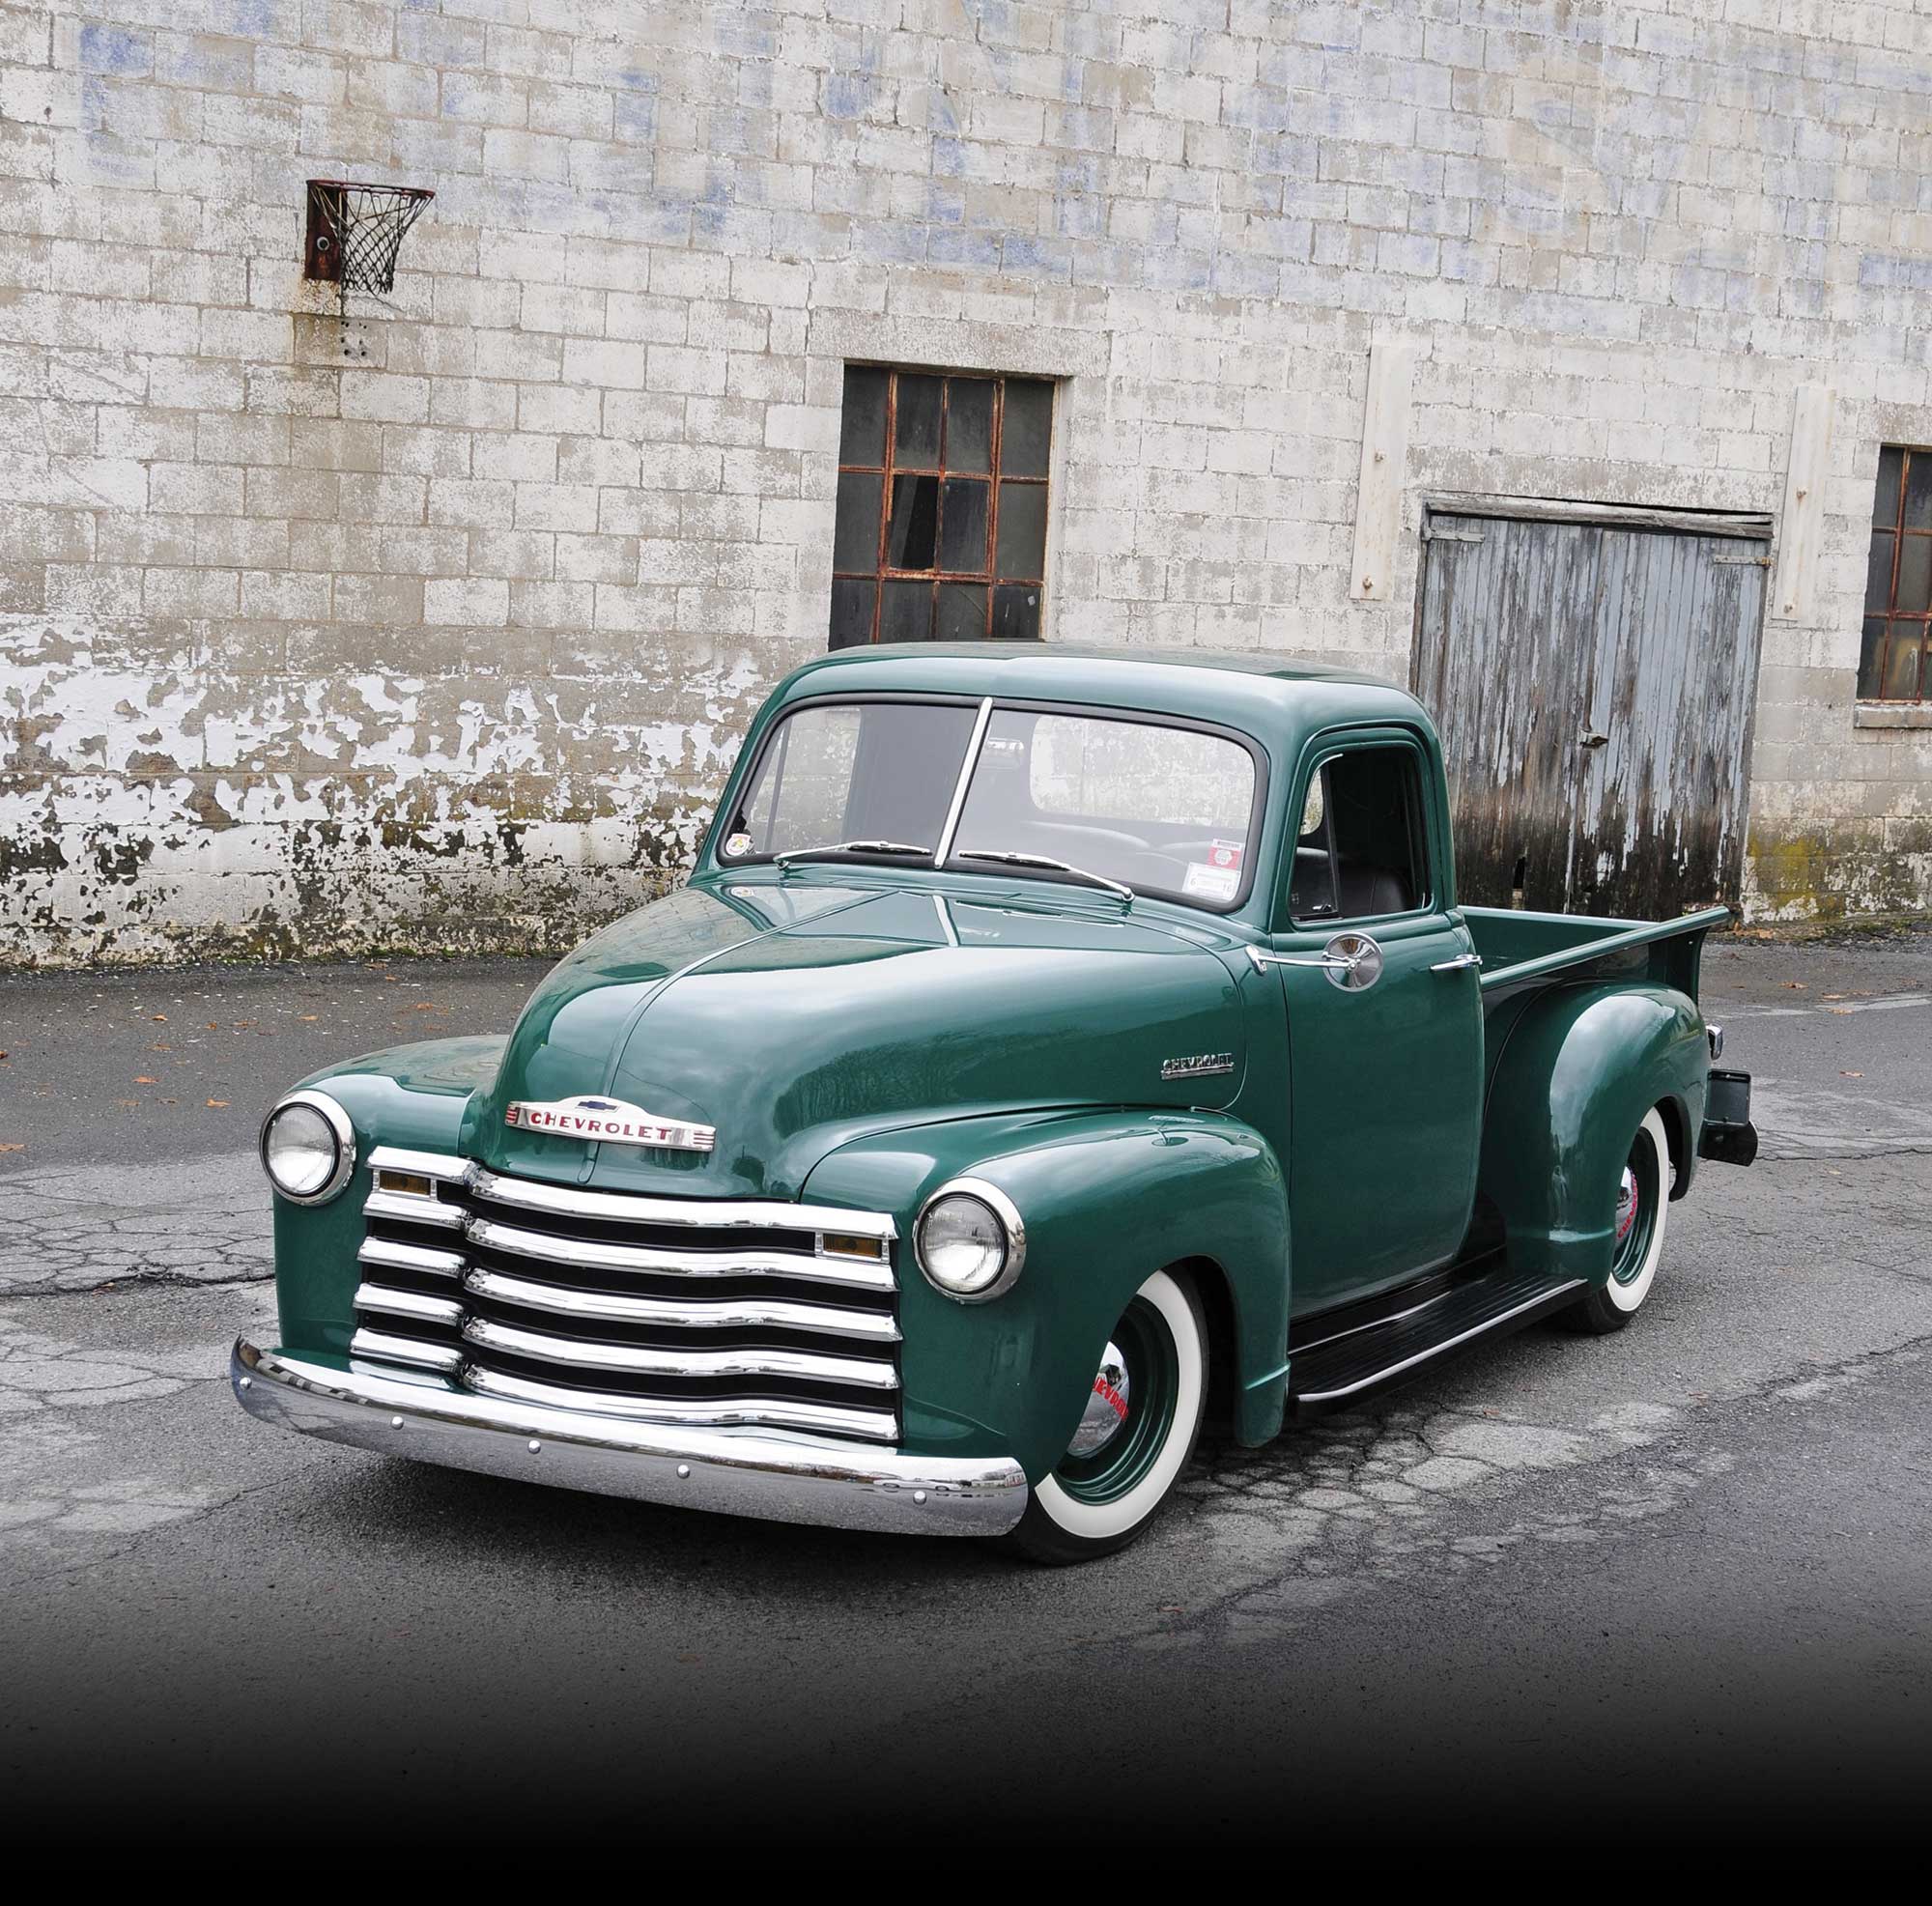 '52 Chevy front view with grey brick building in the background